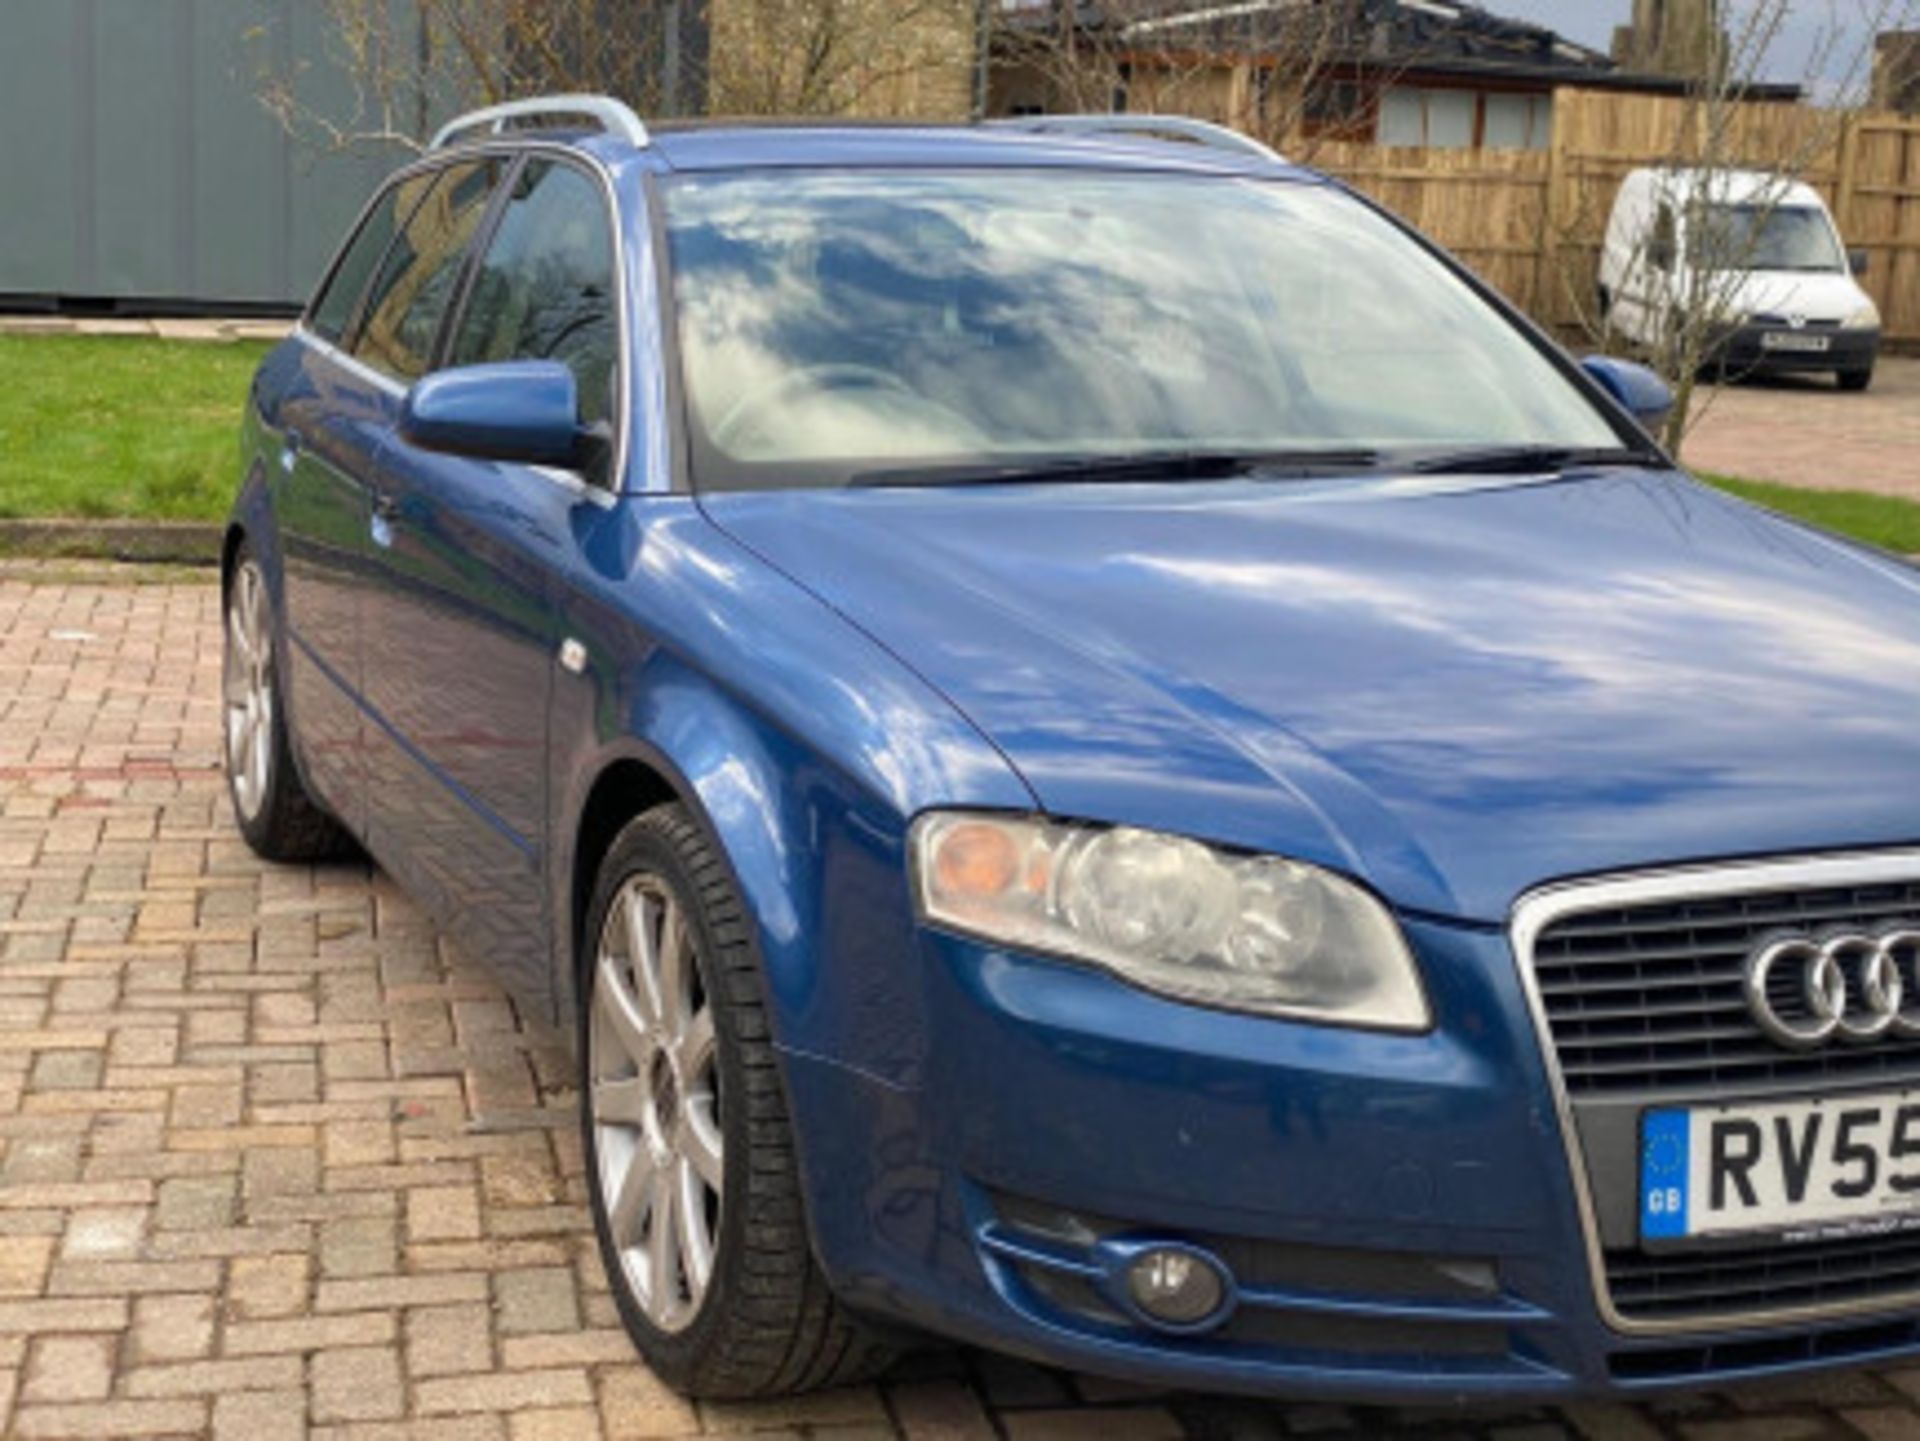 AUDI A4 AVANT 1.9 TDI SE 5DR ESTATE - RARE AND RELIABLE LUXURY WAGON >>--NO VAT ON HAMMER--<< - Image 34 of 97